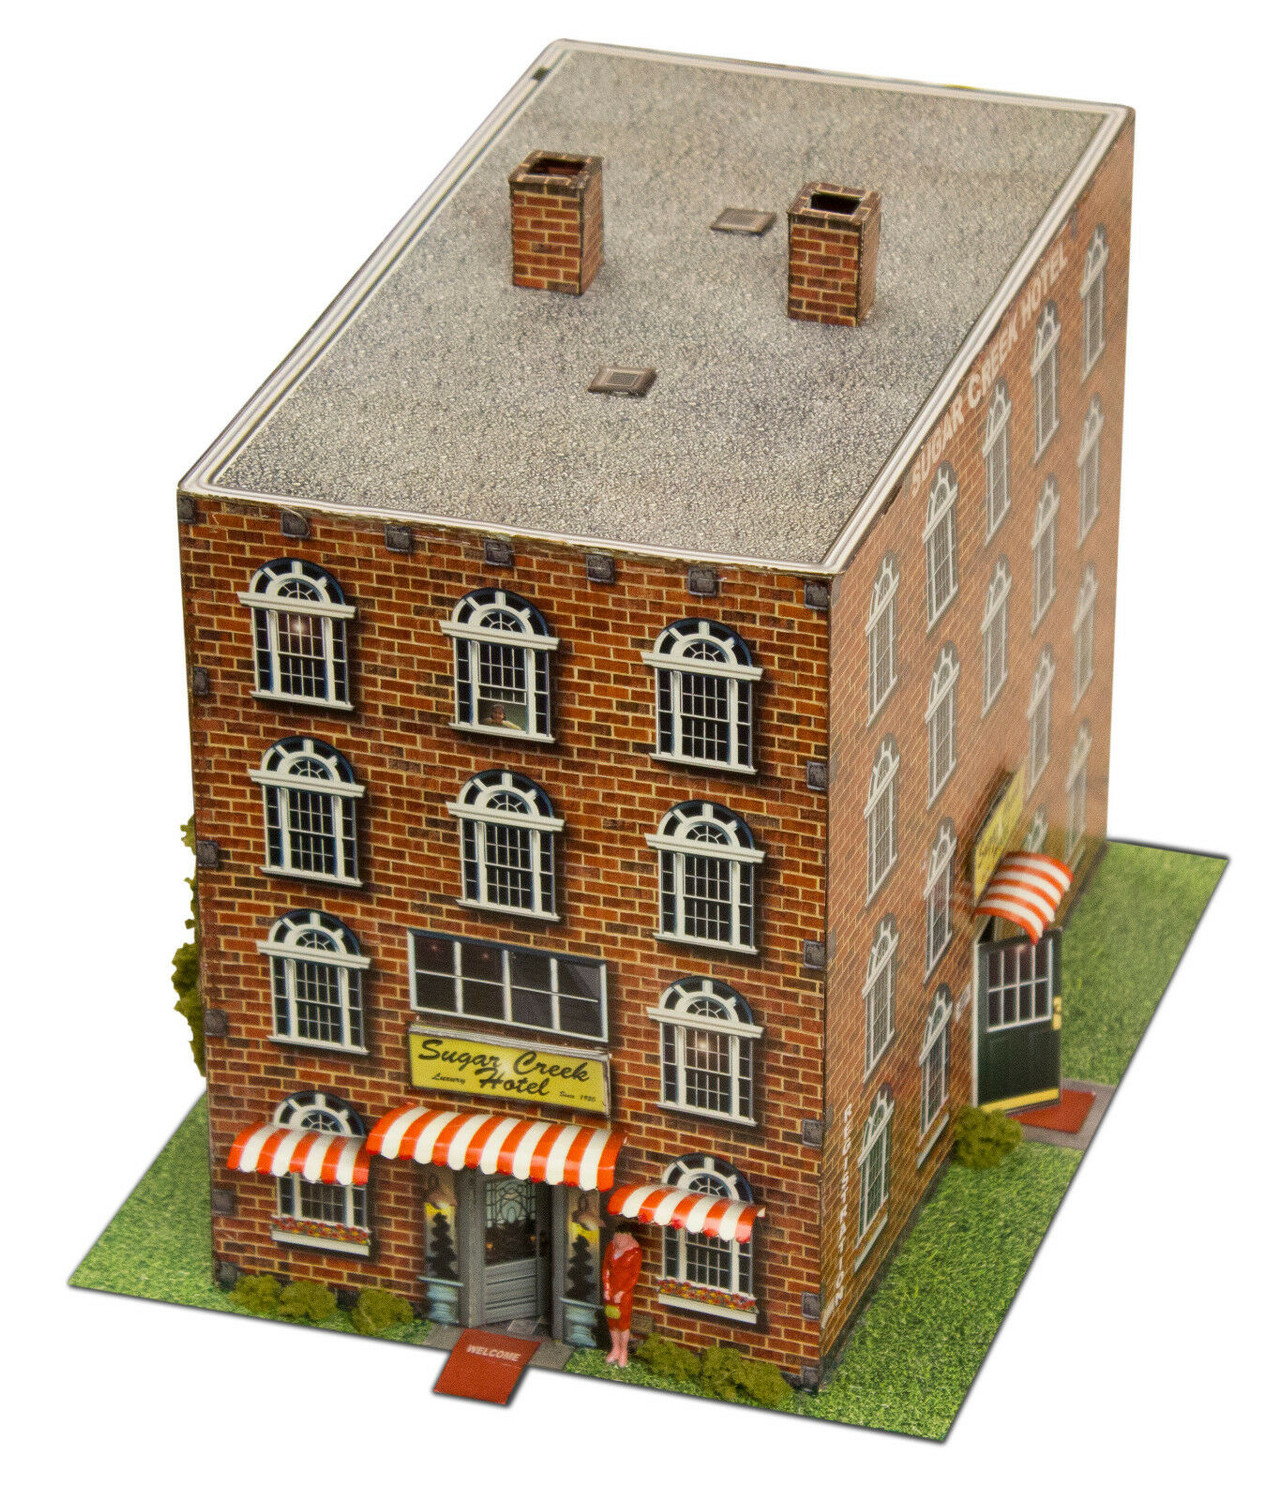 BK 8708 1:87 Scale "Hotel" Photo Real Scale Building Kit